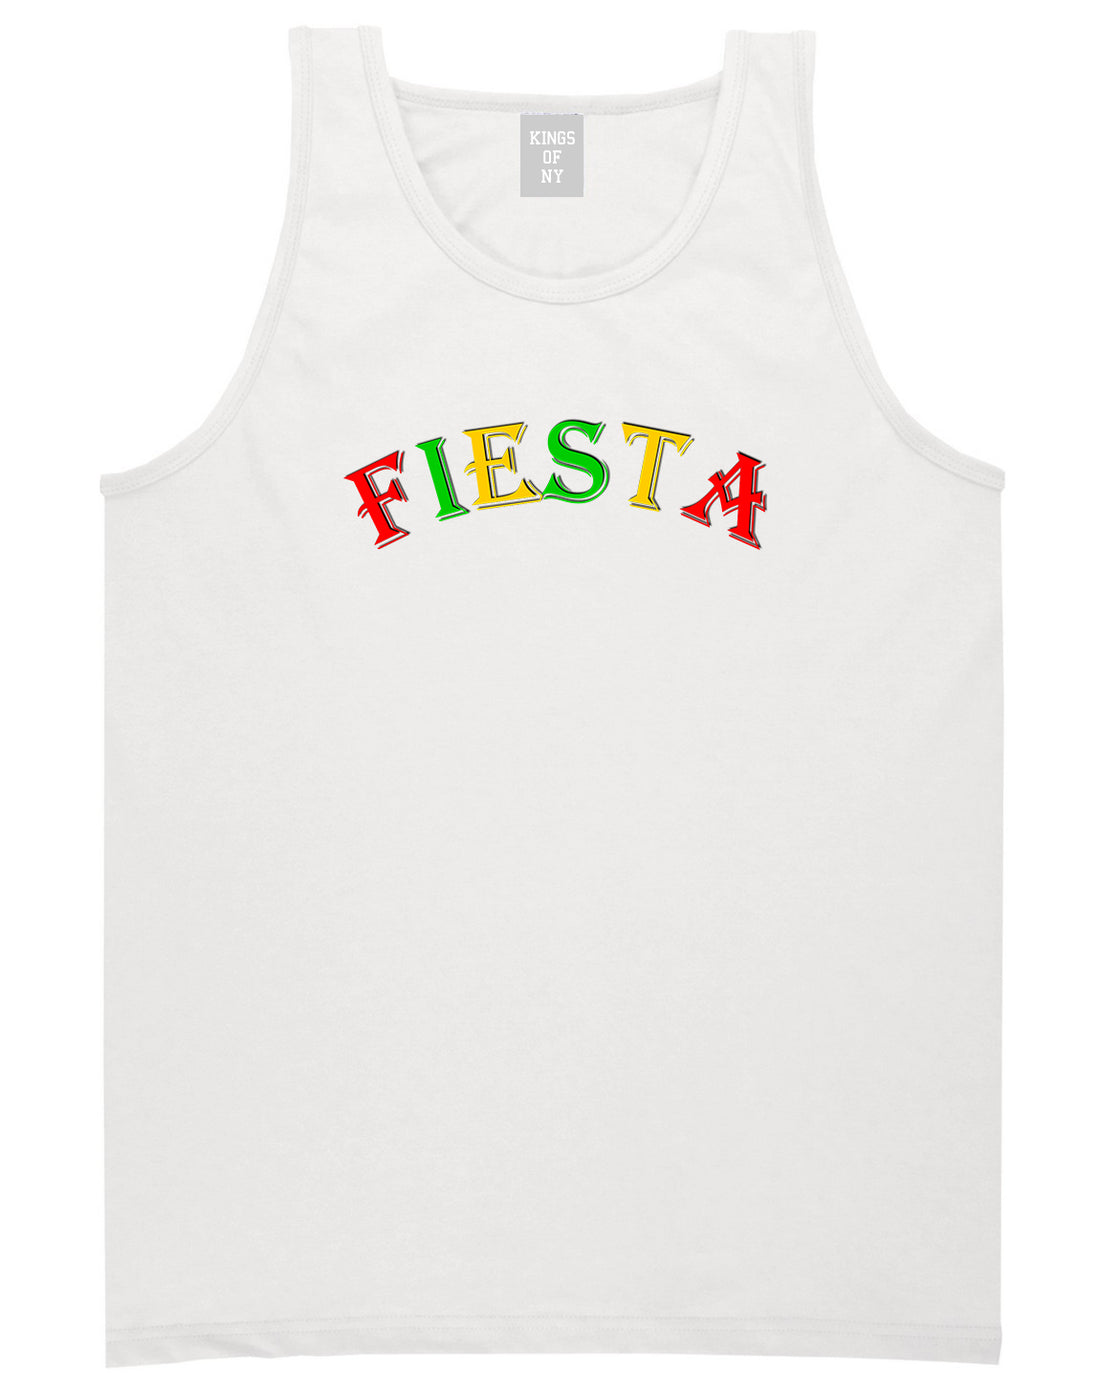 Fiesta Party Cinco De Mayo Mens White Tank Top Shirt by KINGS OF NY